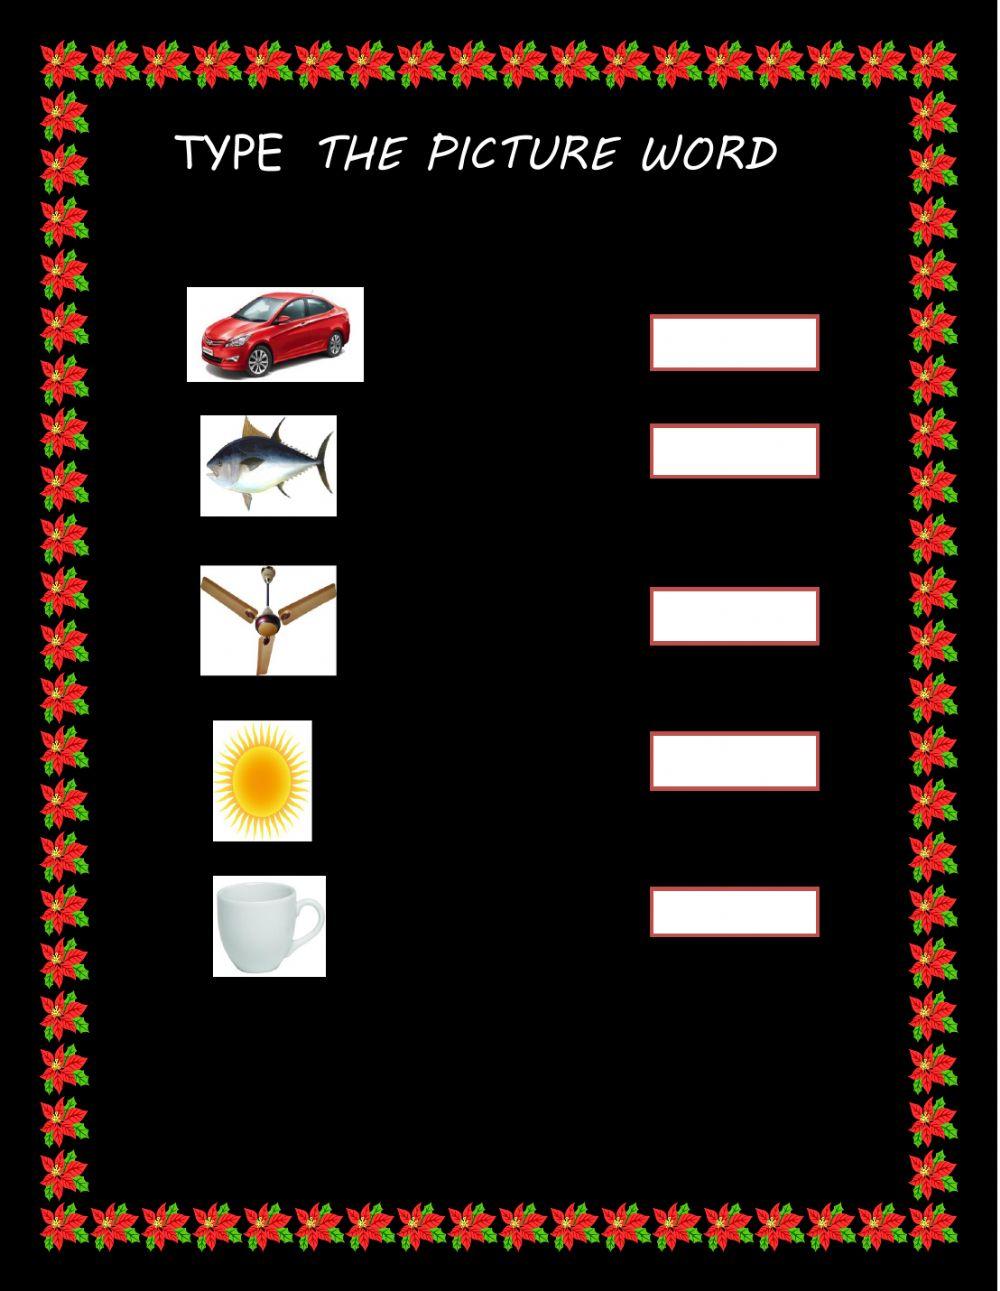 TYPE THE PICTURE WORD